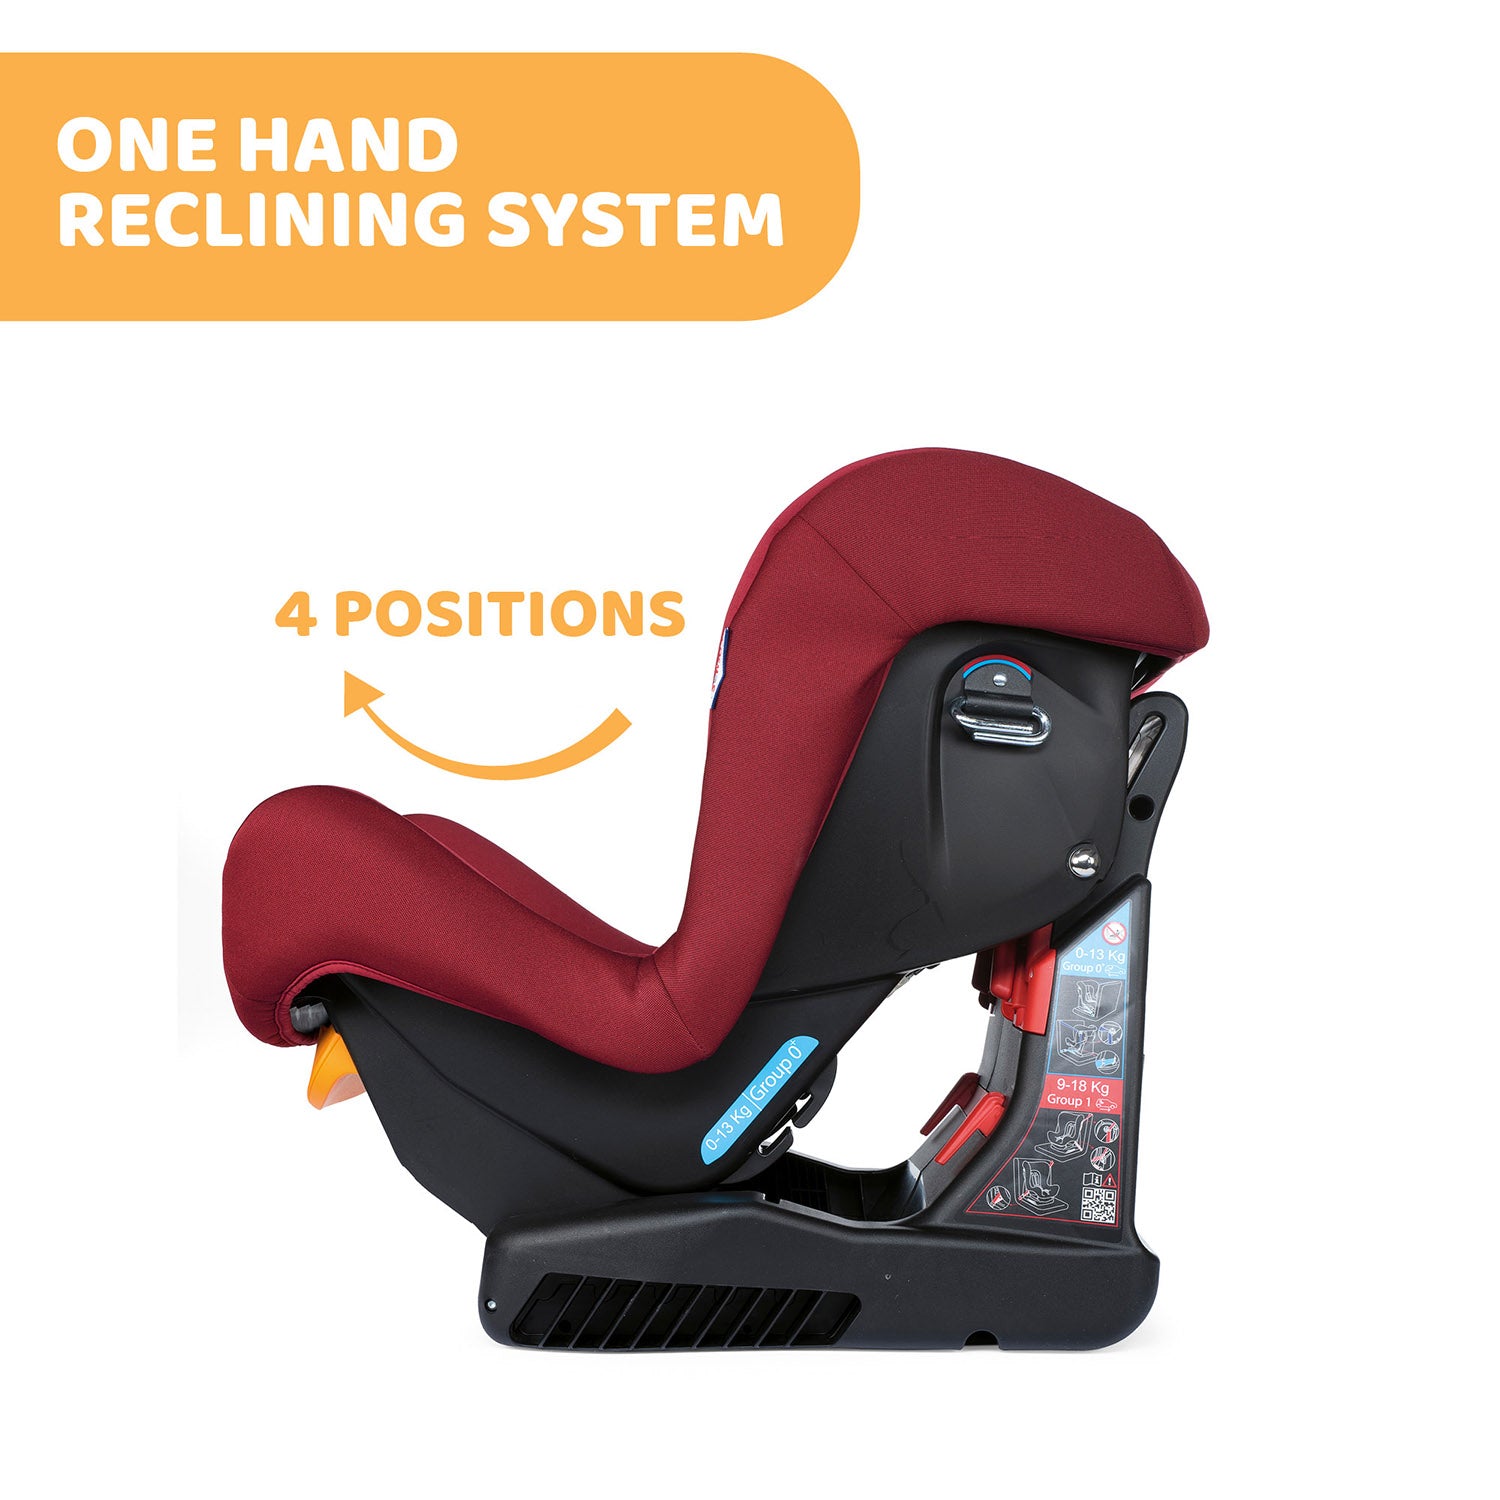 Cosmos Convertible Car Seat - 0M+ up to 18kgs